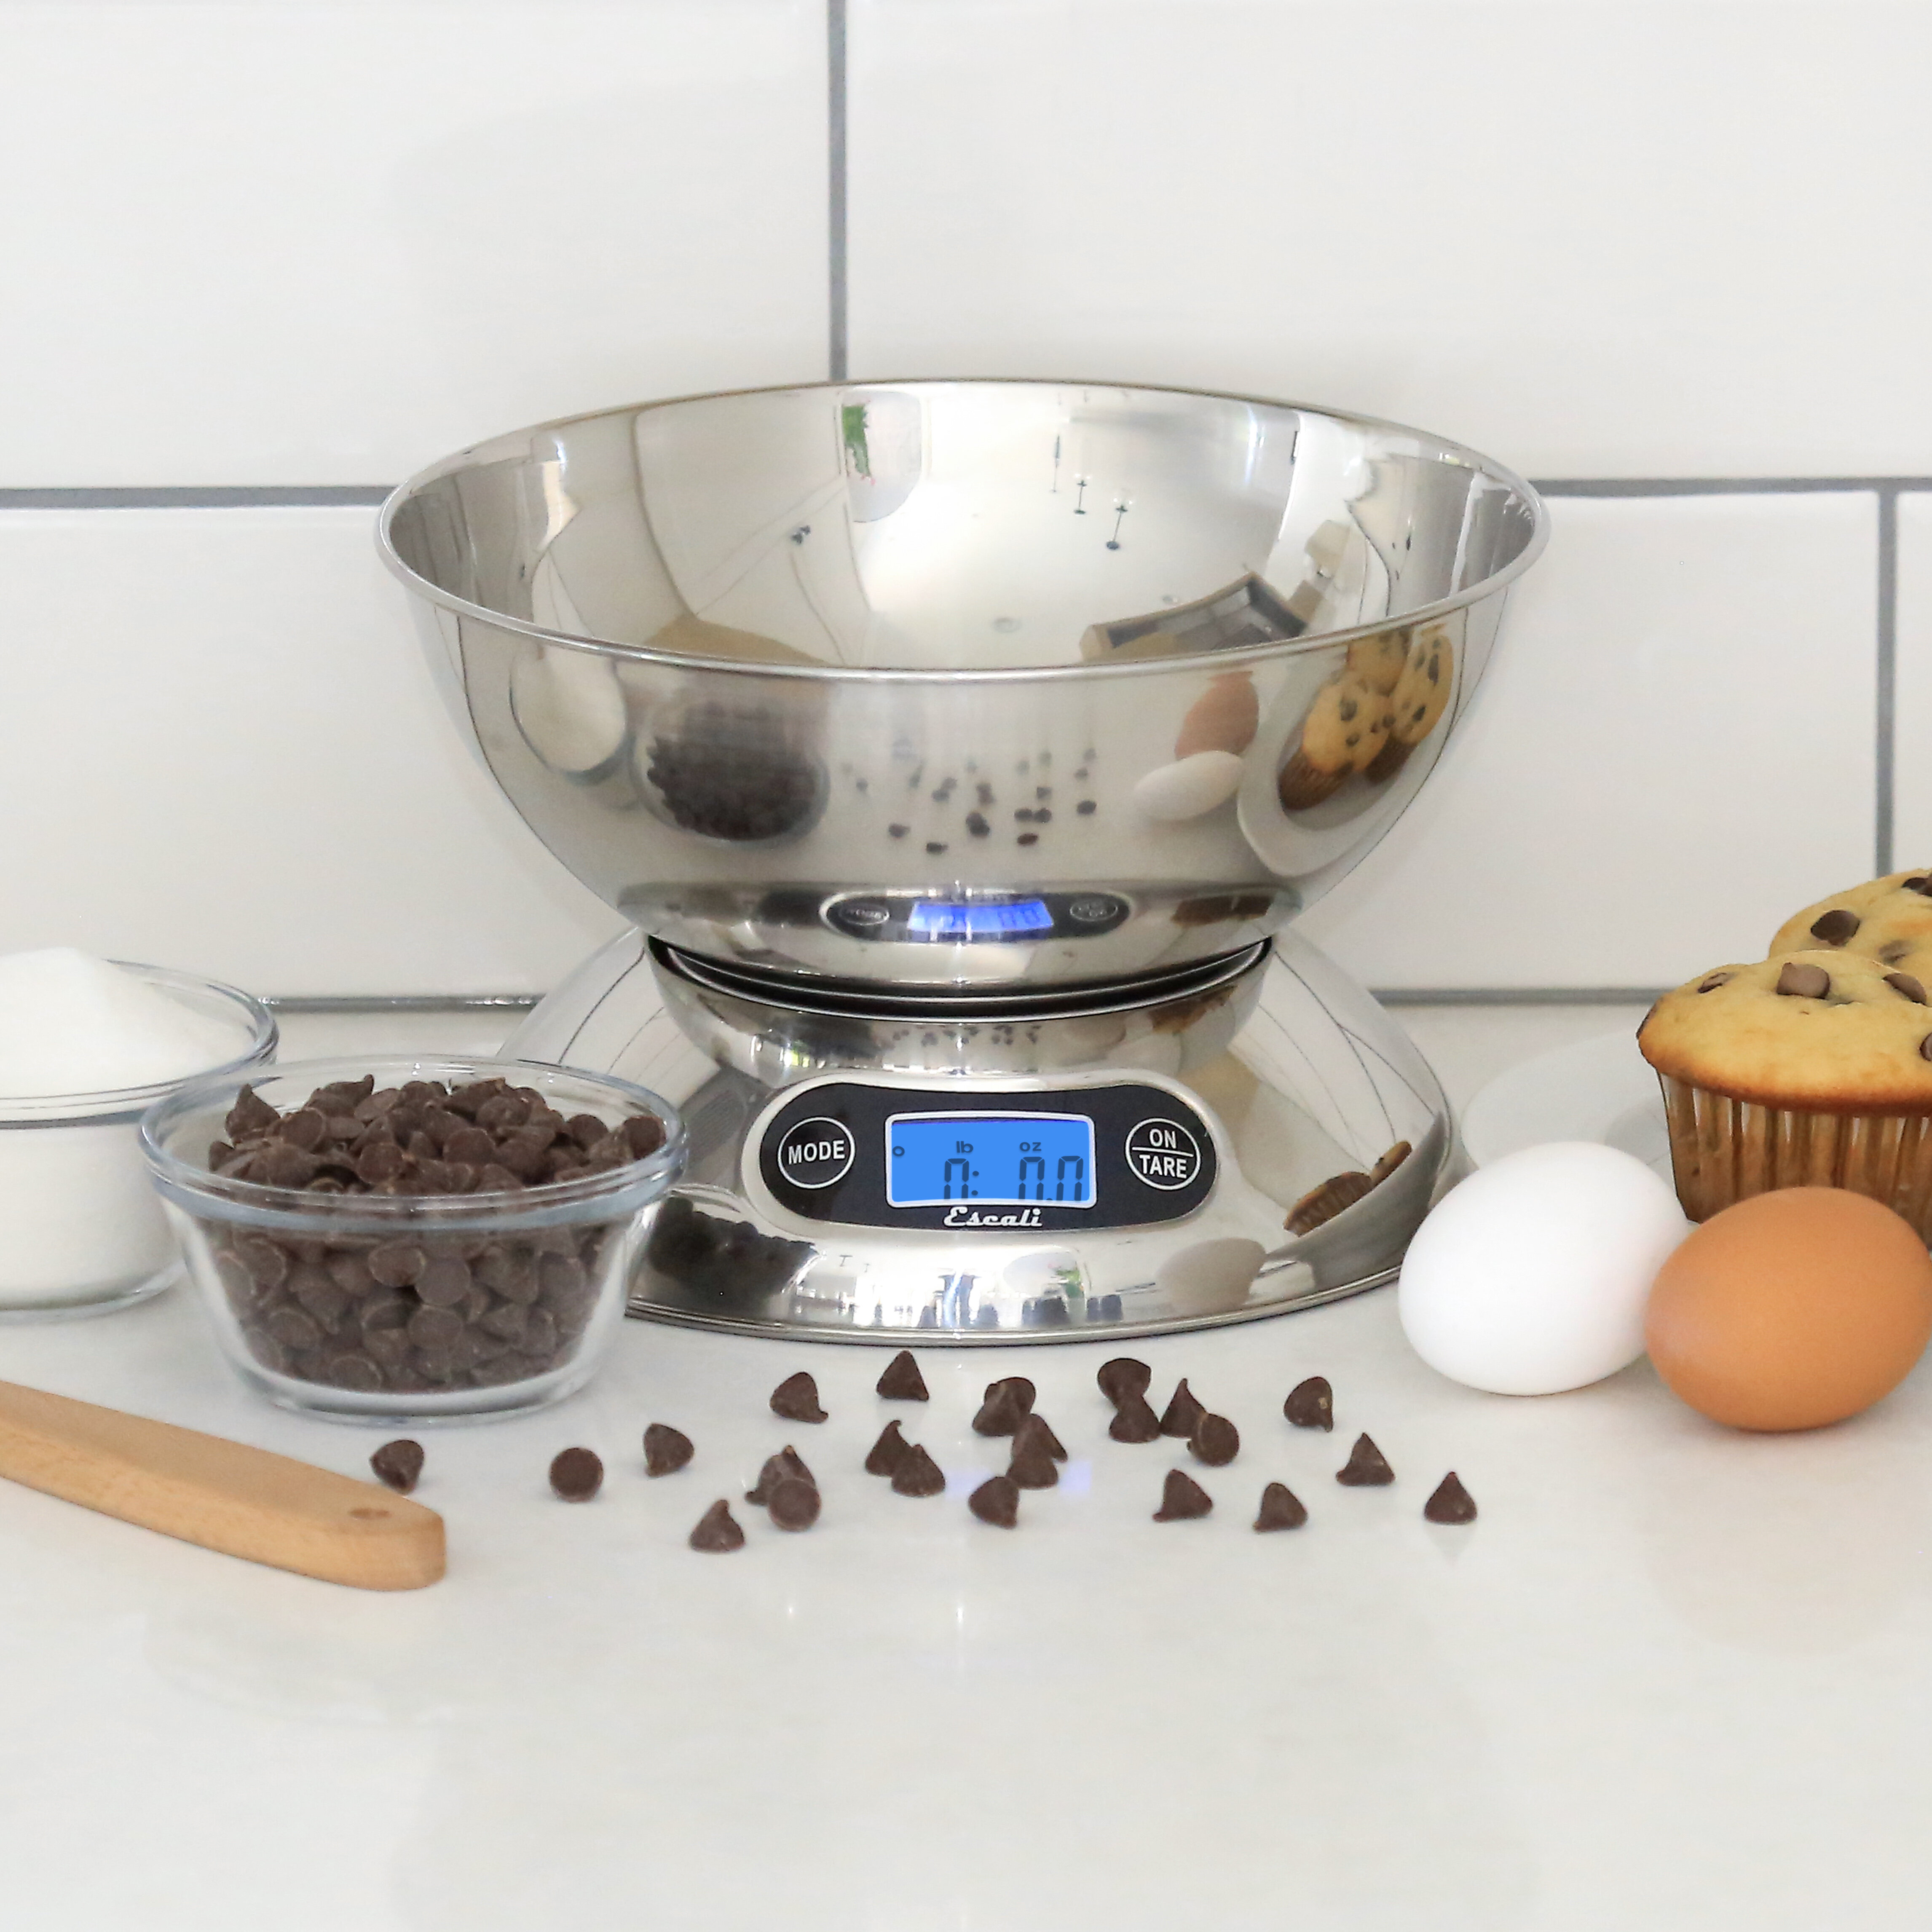 Escali Rondo Stainless Steel Digital Kitchen Scale with Bowl & Reviews